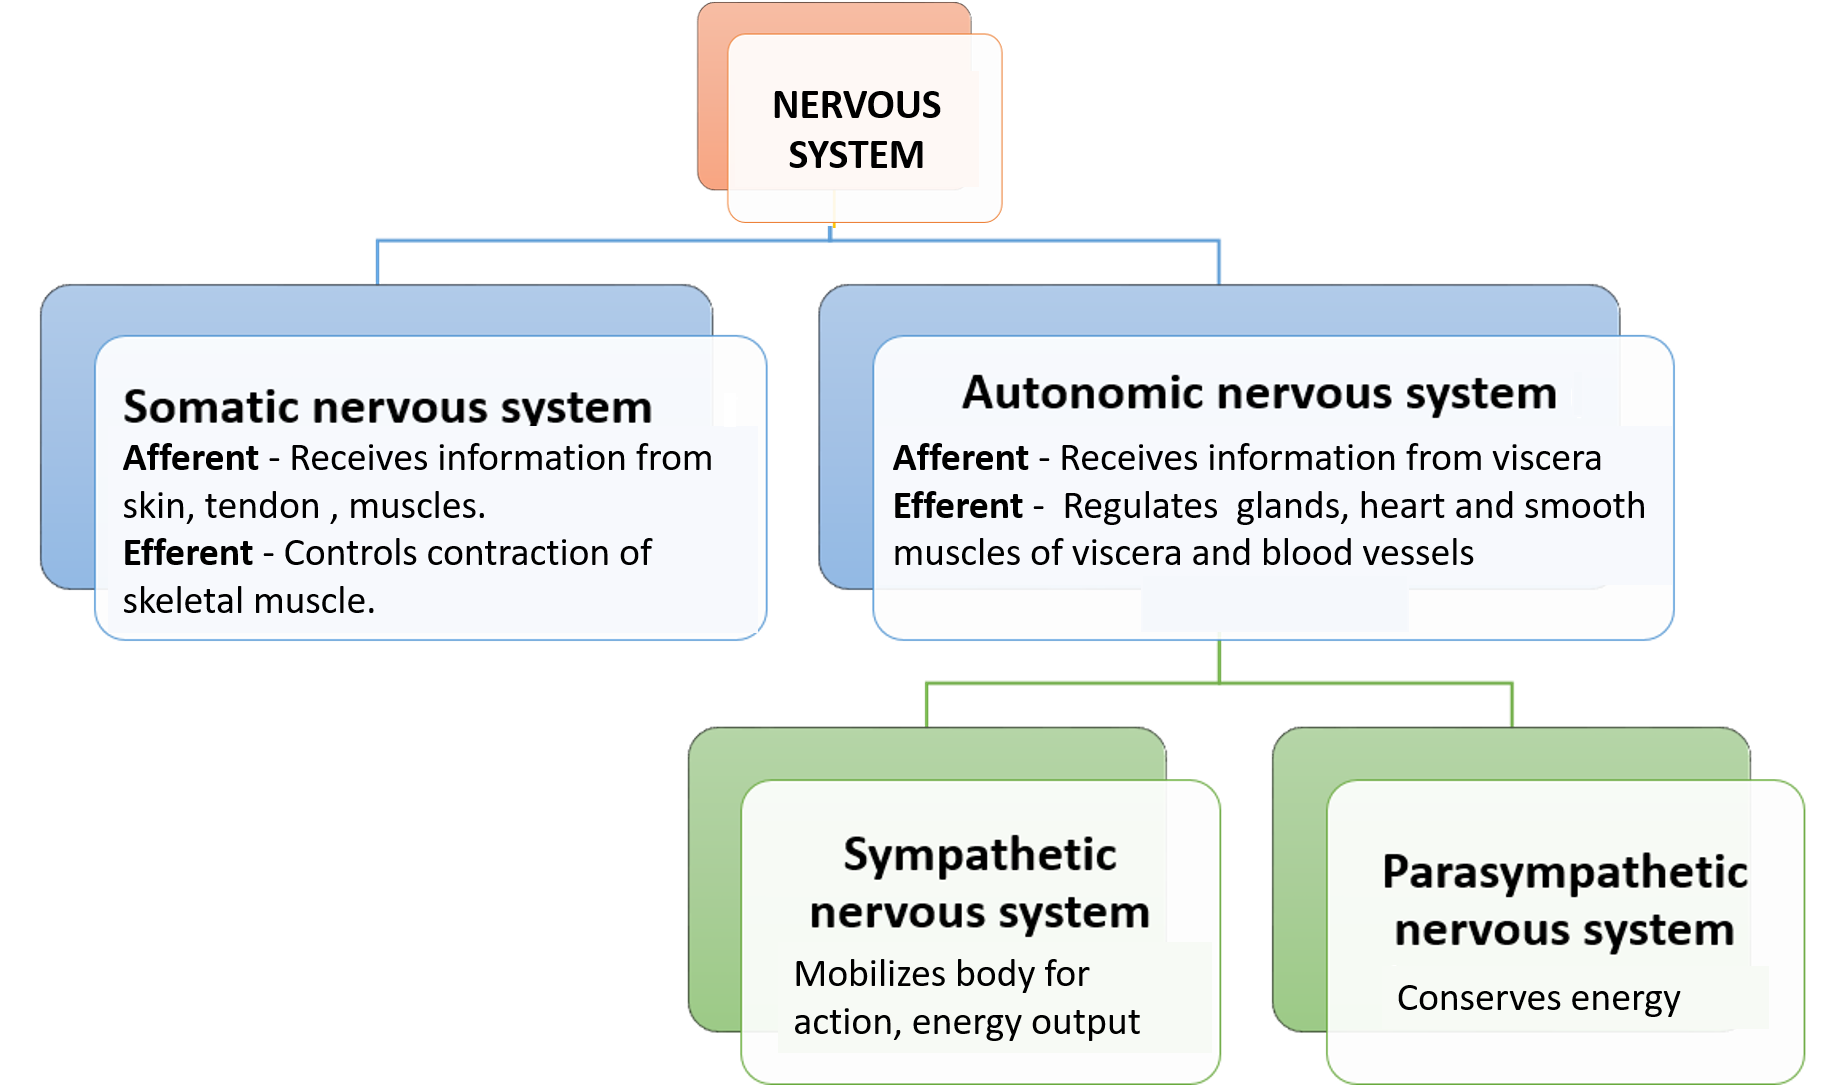 Functional subdivisions of nervous system